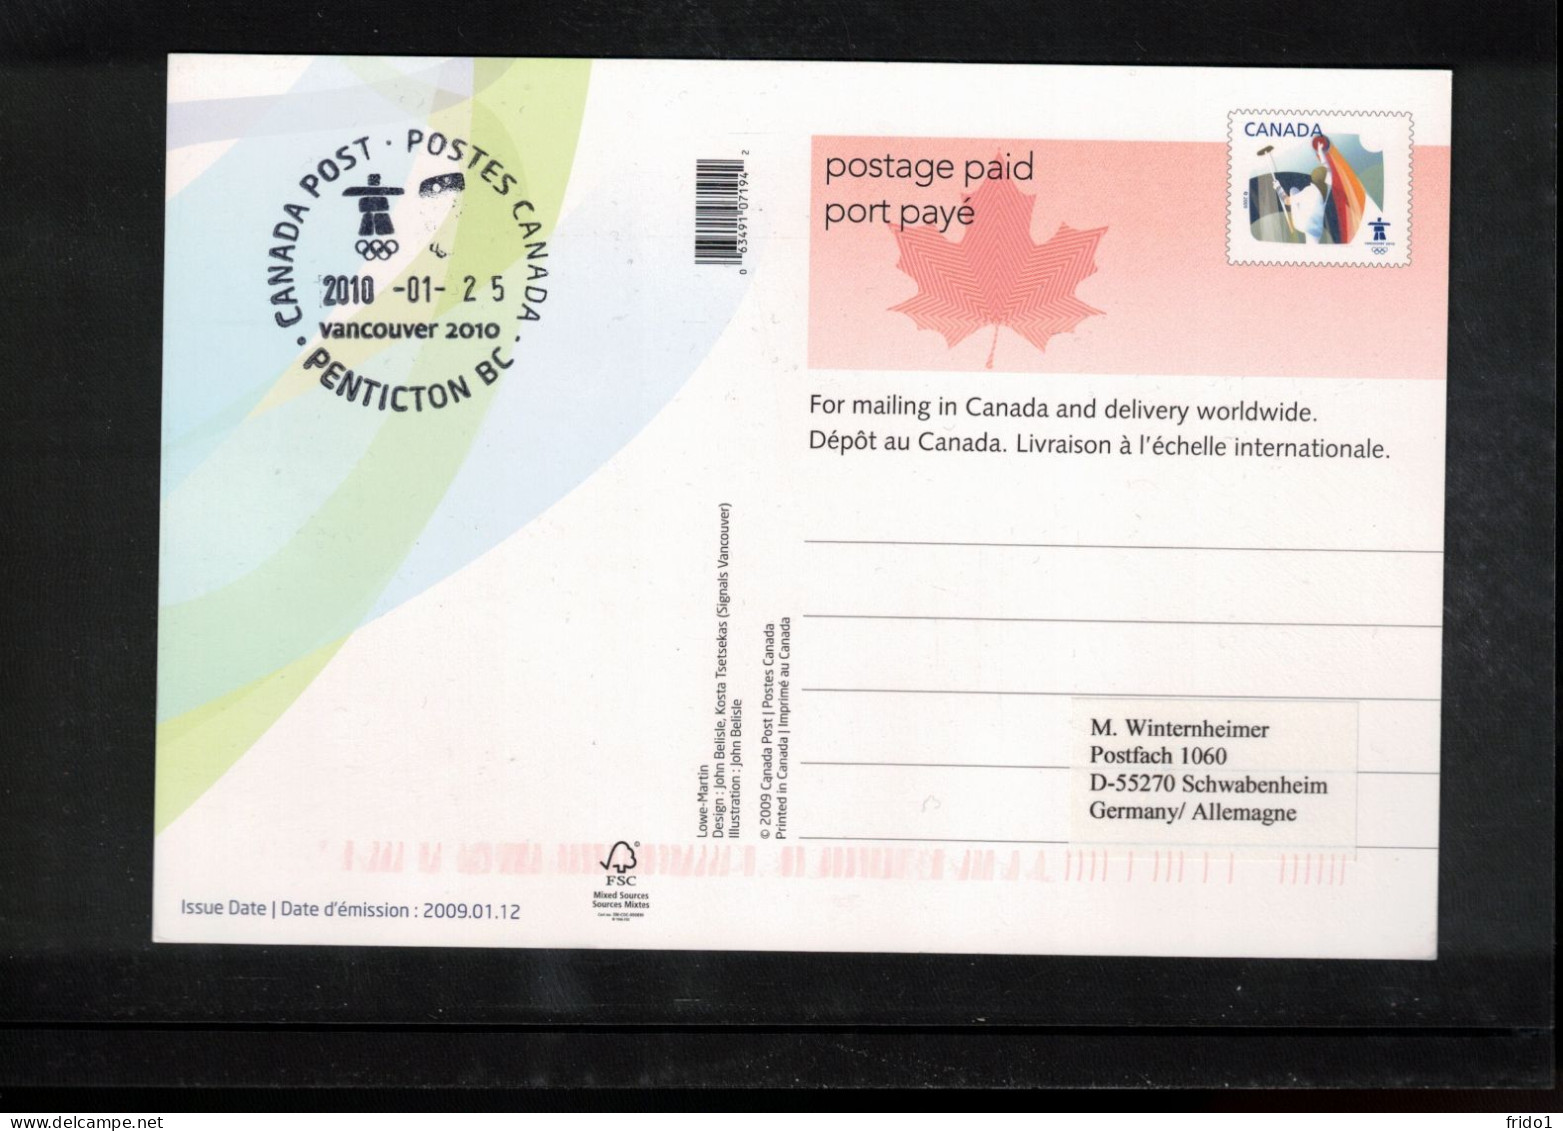 Canada 2010 Olympic Games Vancouver - PENTICTON BC Postmark Interesting Postcard - Winter 2010: Vancouver